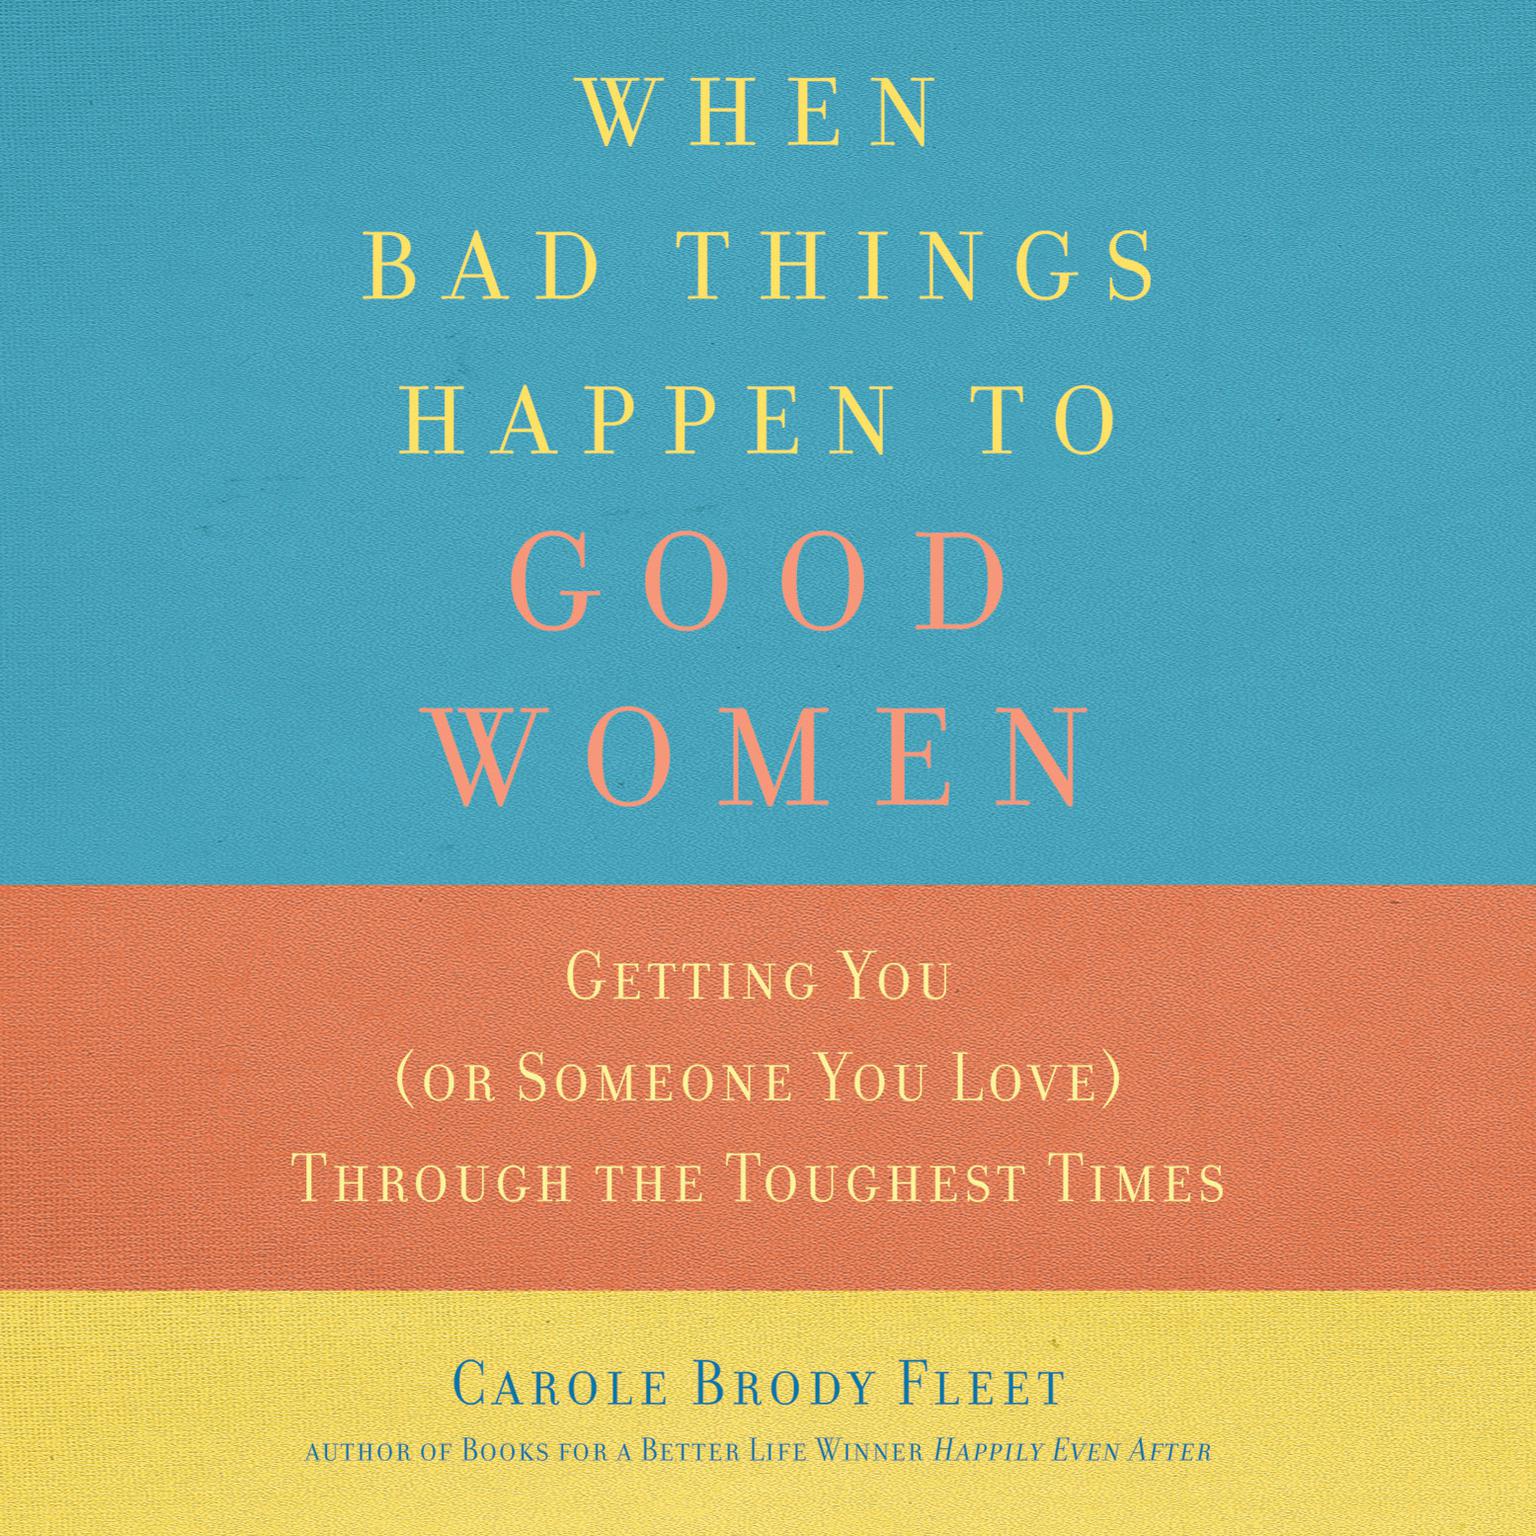 When Bad Things Happen to Good Women: Getting You (or Someone You Love) through the Toughest Times Audiobook, by Carole Brody Fleet